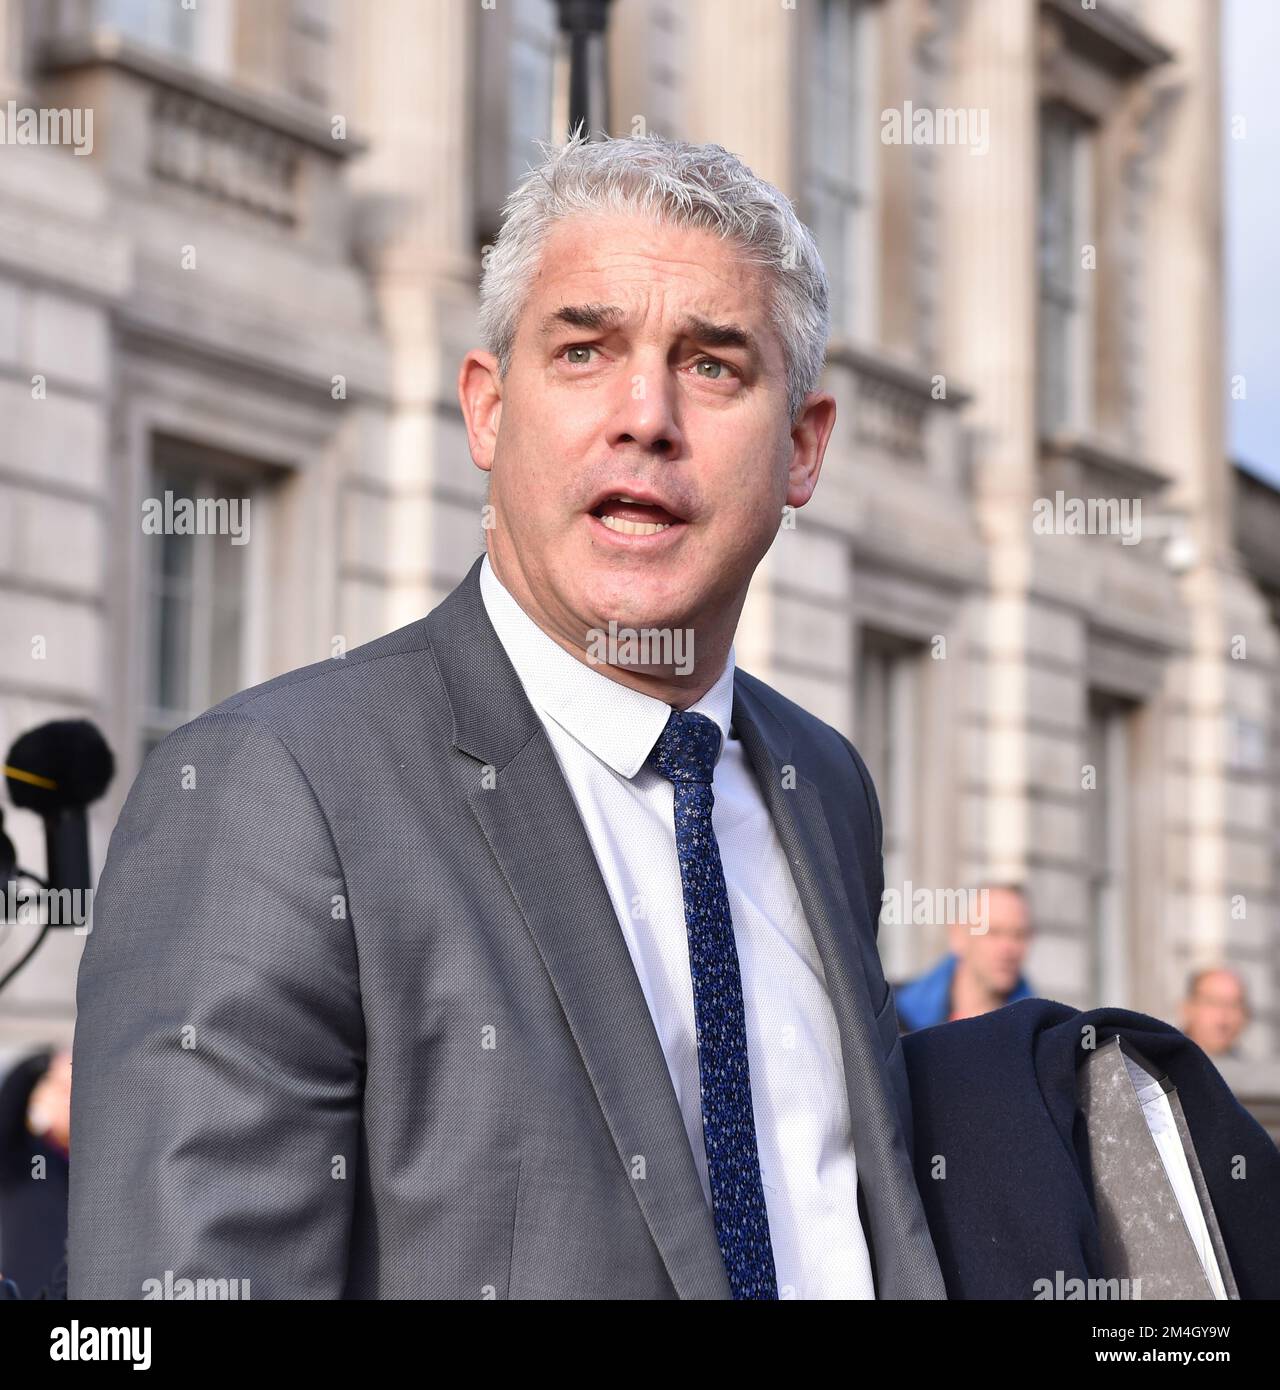 Steve Barclay, Secretary of State for Health and Social Care of the United Kingdom, is seen leaving Cabinet Office, after Cobra meeting. Stock Photo